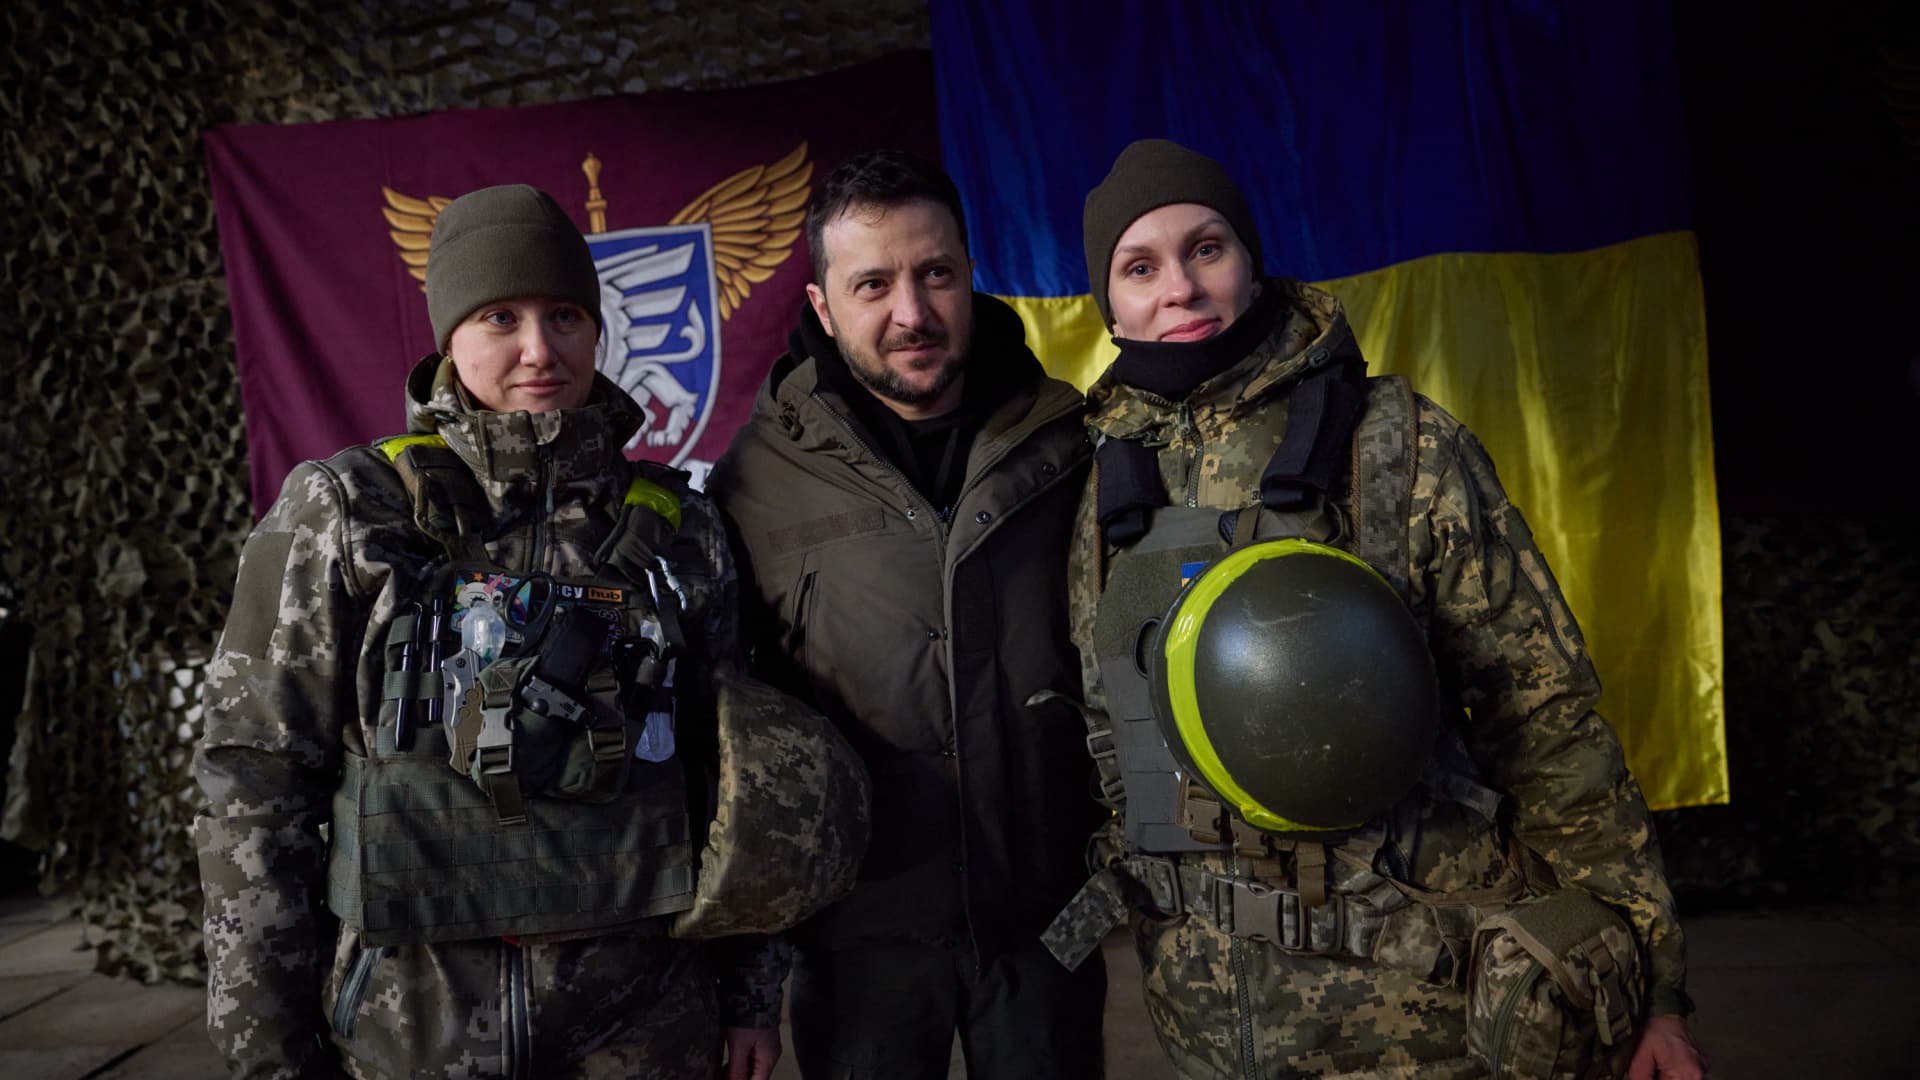 Ukrainian President, Volodymyr Zelenskyy visits Donetsk front, where the most violent clashes in the war with Russia took place in Ukraine on December 06, 2022.